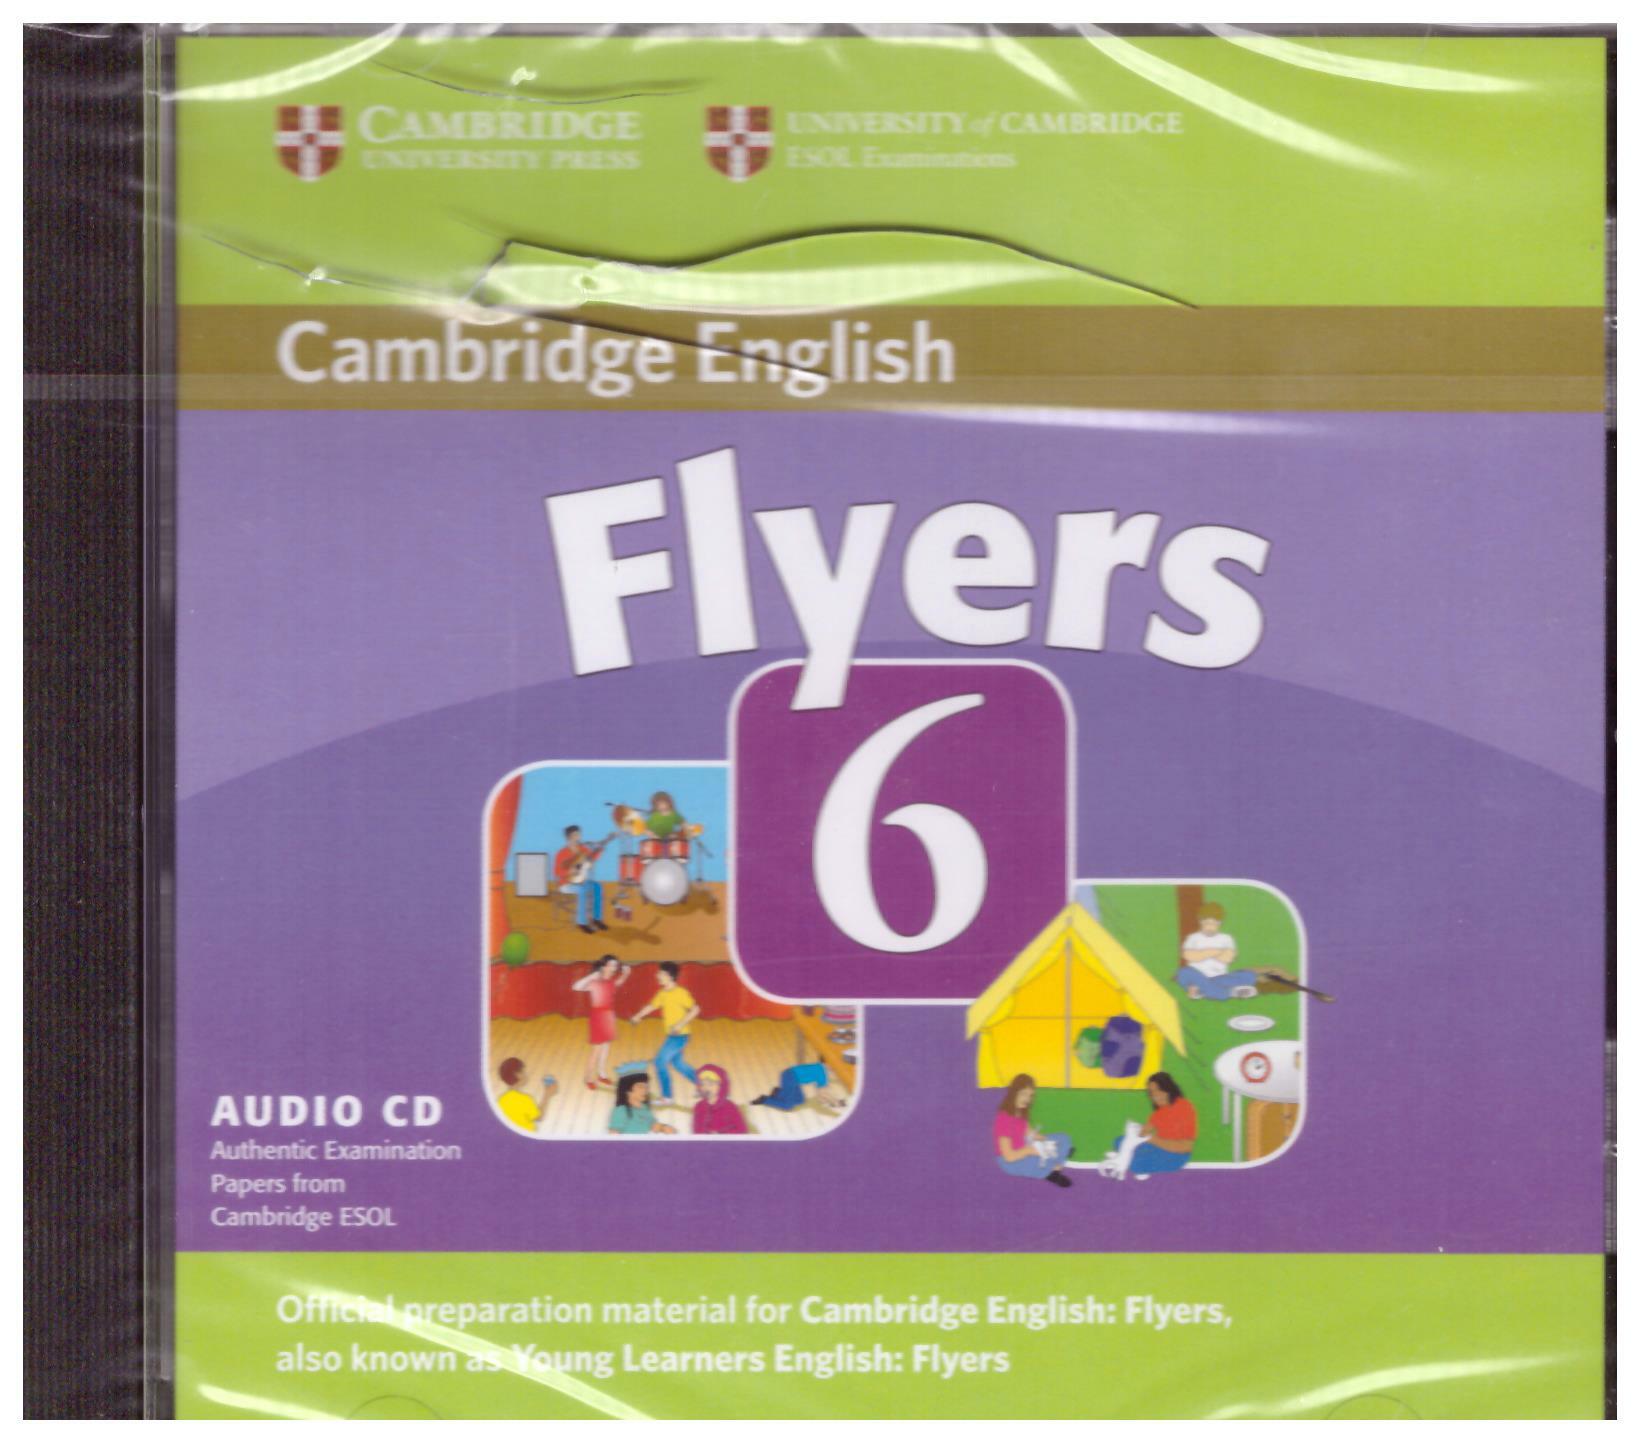 Learners　Audio　Flyers　Tests　English　Young　Cambridge　CD